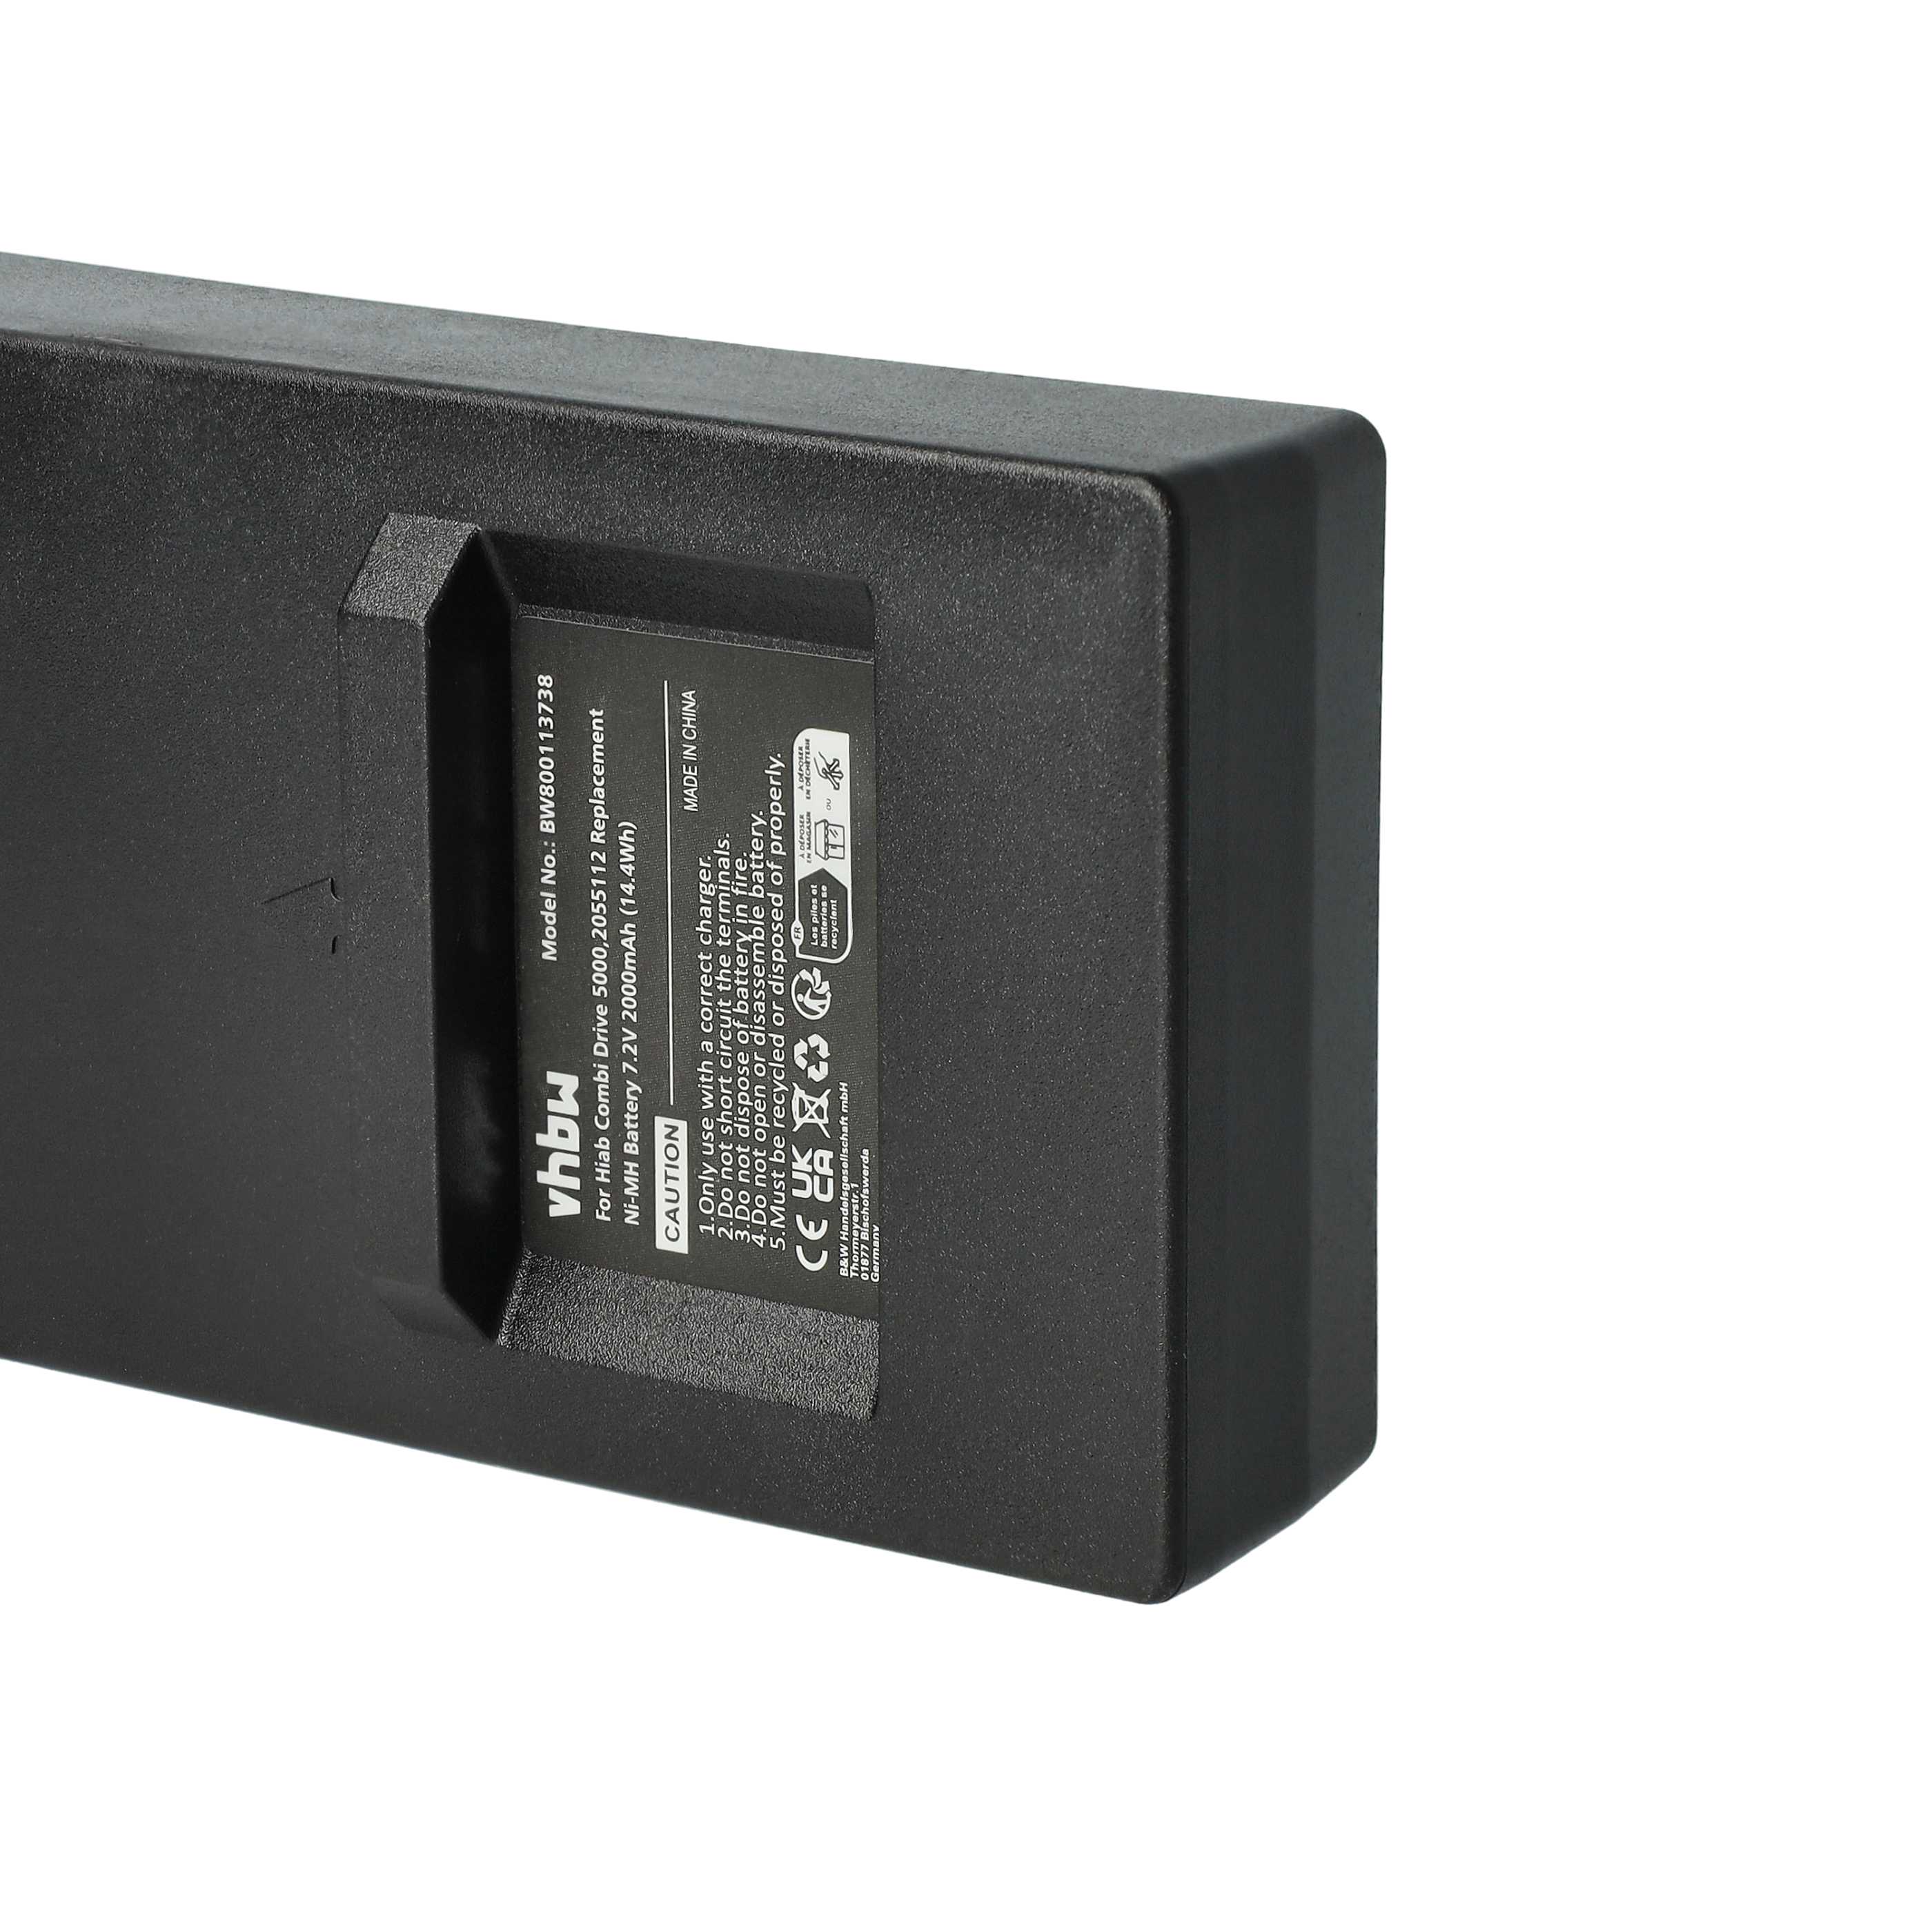 Industrial Remote Control Battery Replacement for 2.250.2011, 2.250.1000, 2.250.2010 - 2000mAh 7.2V NiMH